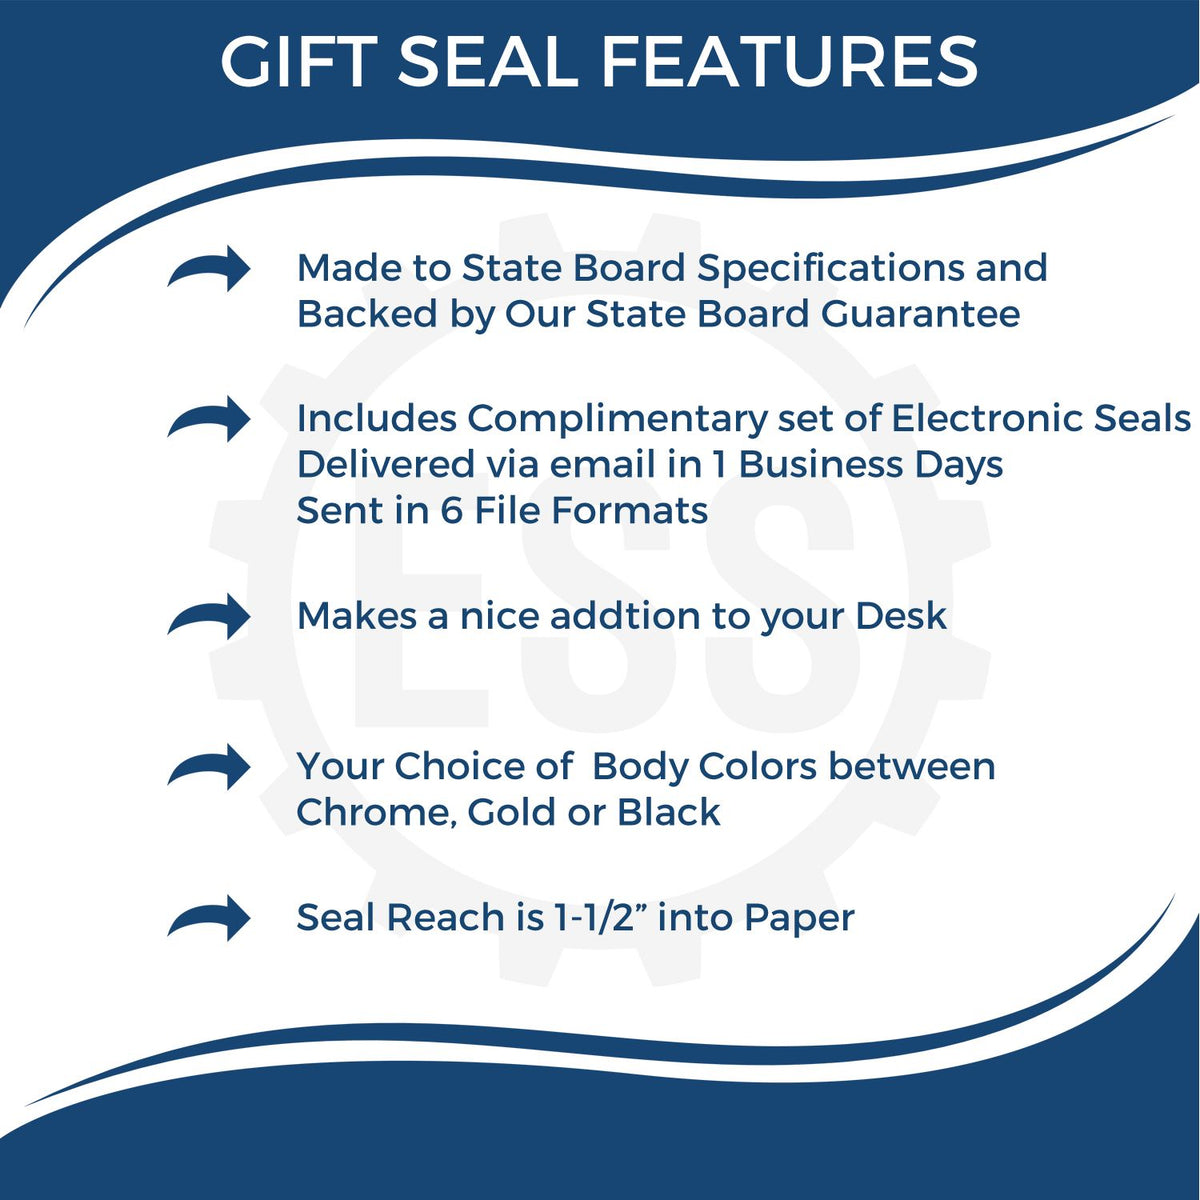 A picture of an infographic highlighting the selling points for the Gift Indiana Architect Seal